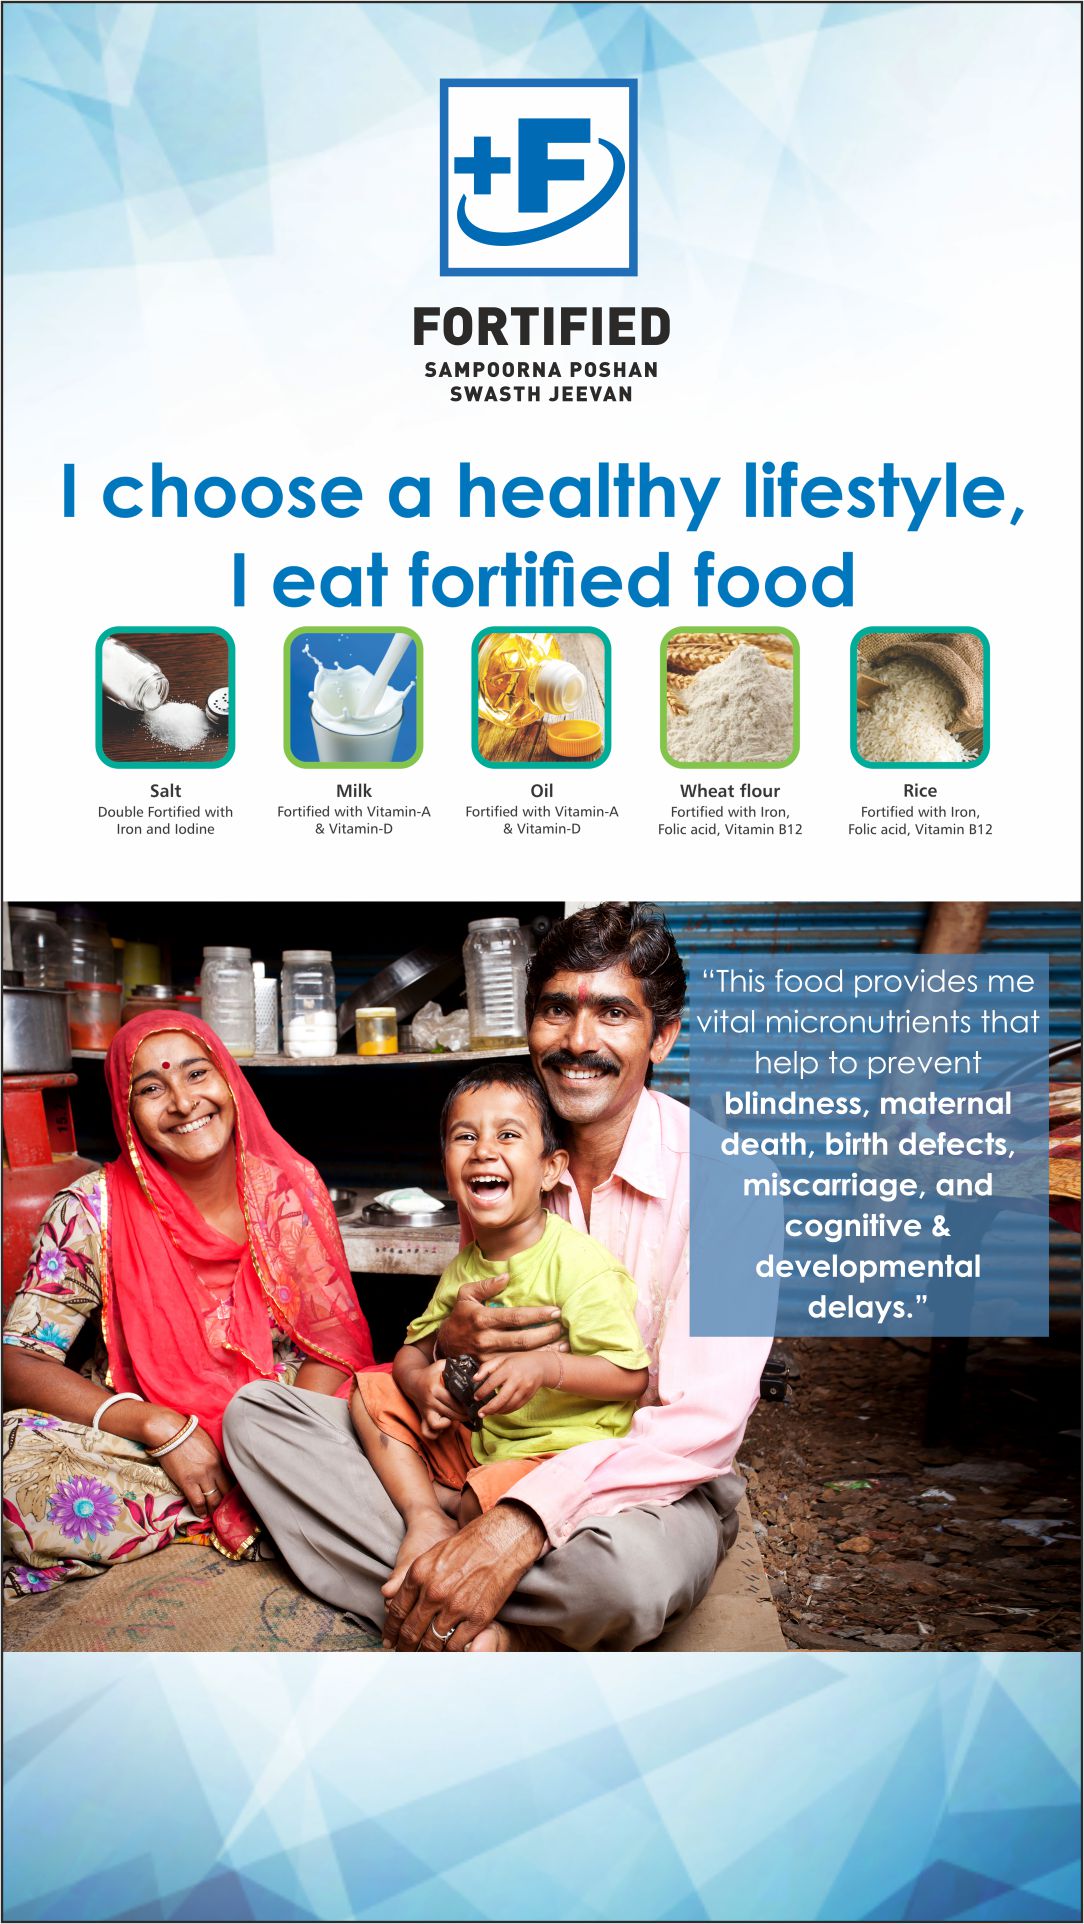 Fssai Food Safety Posters